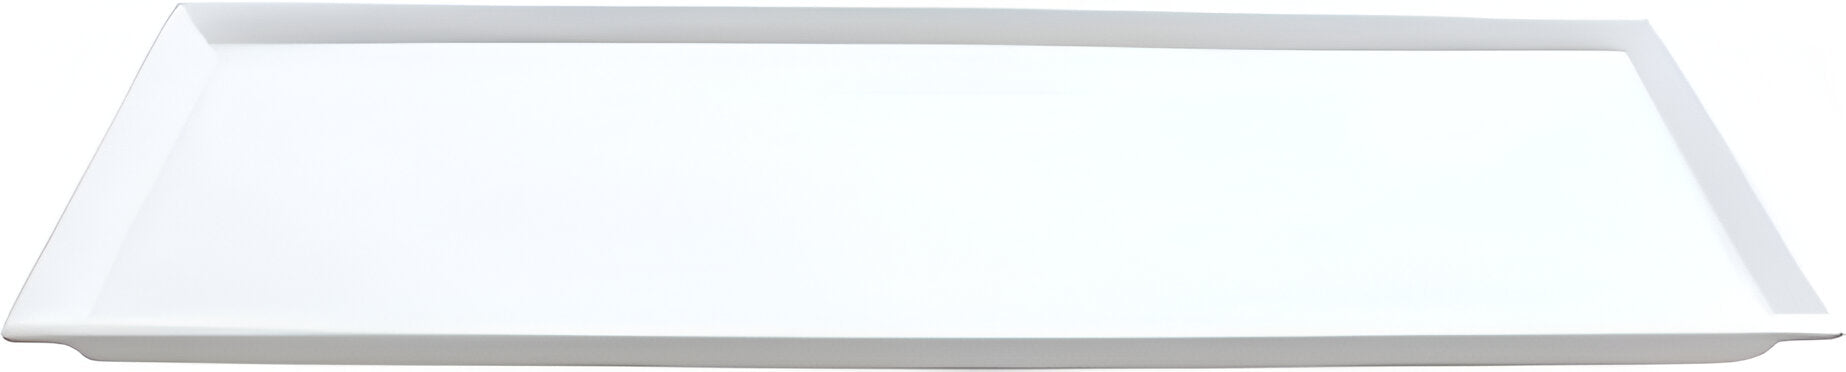 Bugambilia - 10.1" White Rectangular Serving Plate With Lid Cover - LCIH1/4-MOD-WW